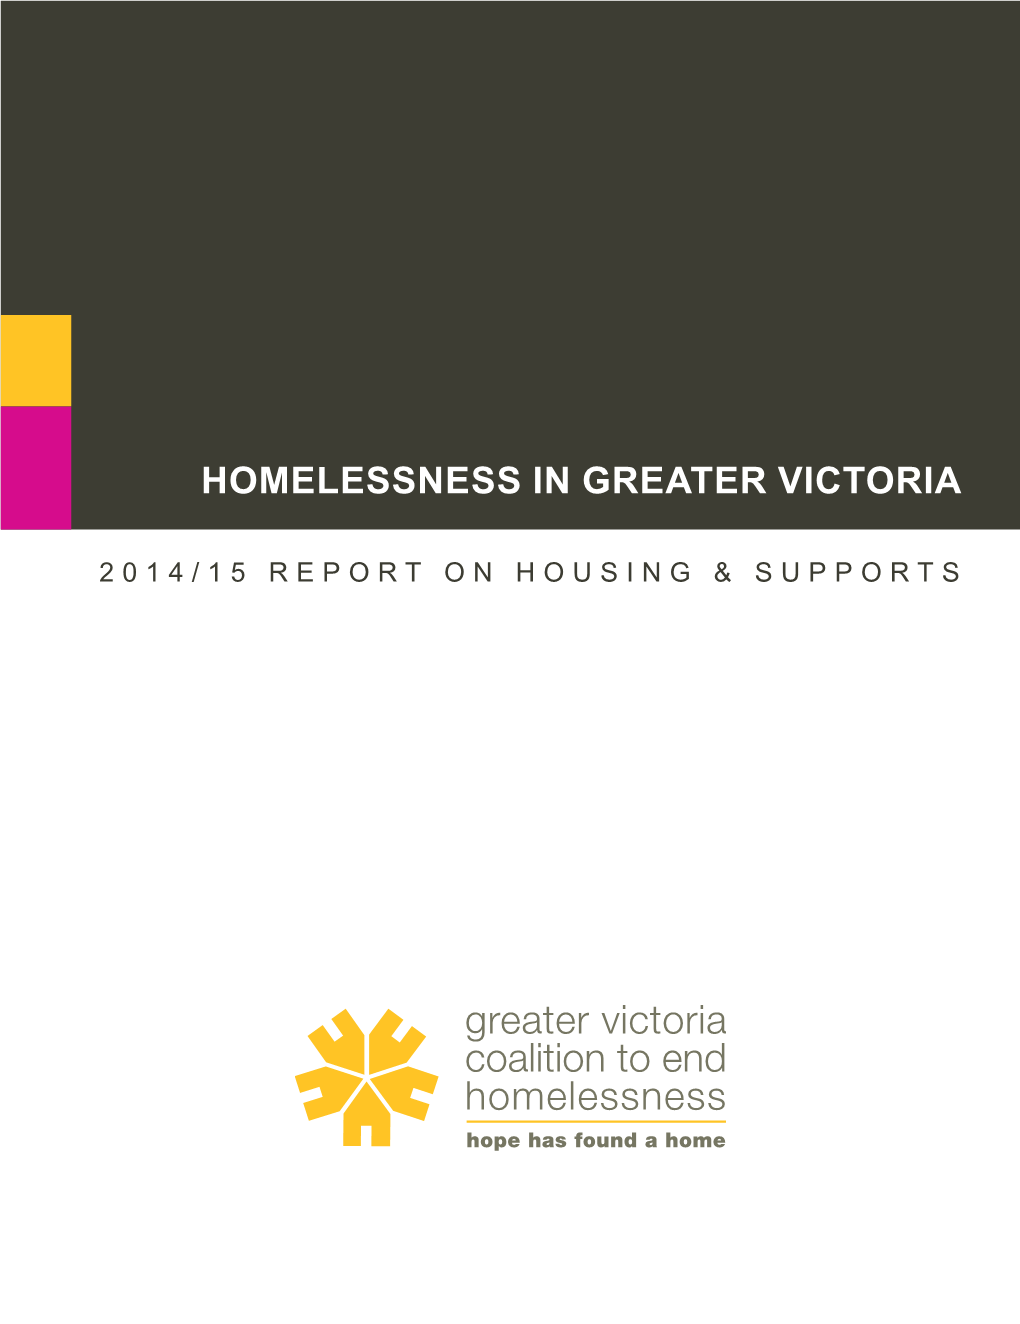 Homelessness in Greater Victoria